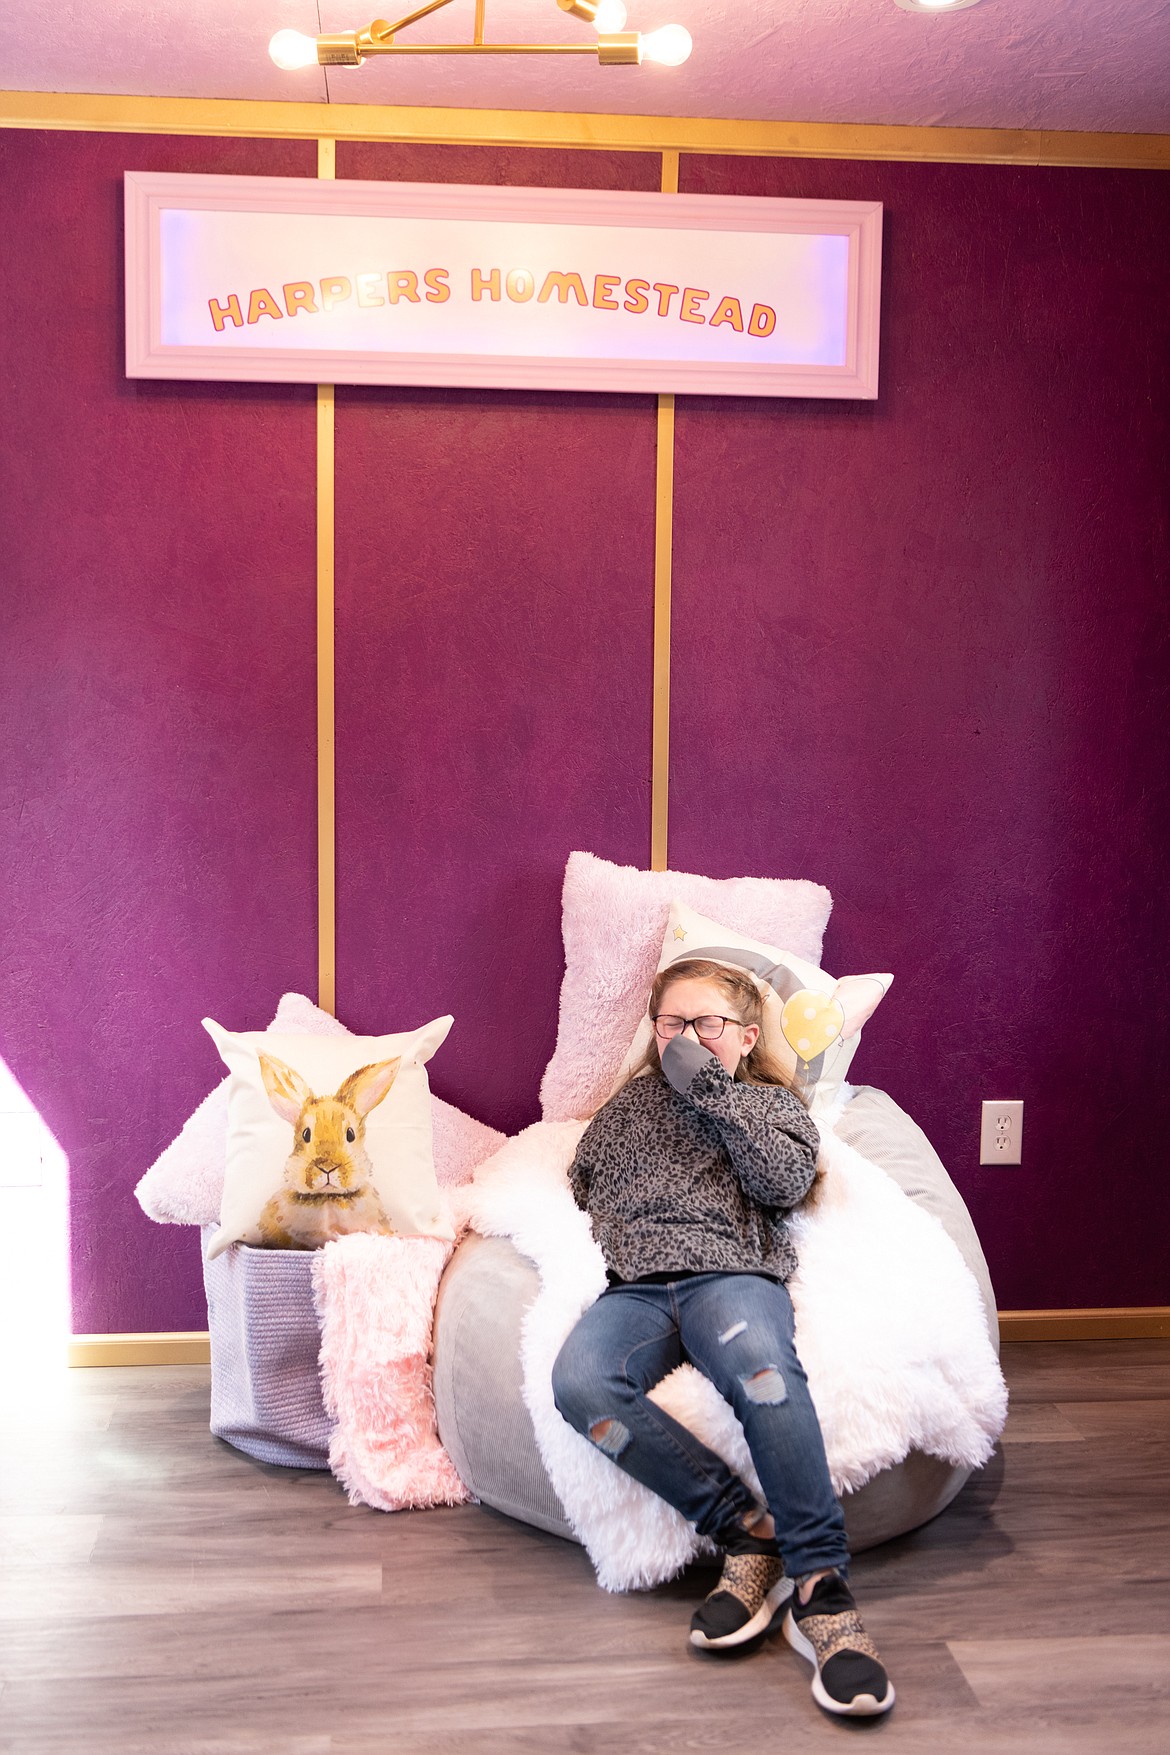 Harper Pursley enjoys the interior of her bunny barn. Other than a dwelling for her bunny "Carrots", "Harper's Homestead" includes a cozy lounge area, art supplies, books, lighting and exterior landscaping. Her wish was granted last week by Make-a-Wish Idaho and the Coeur Group.